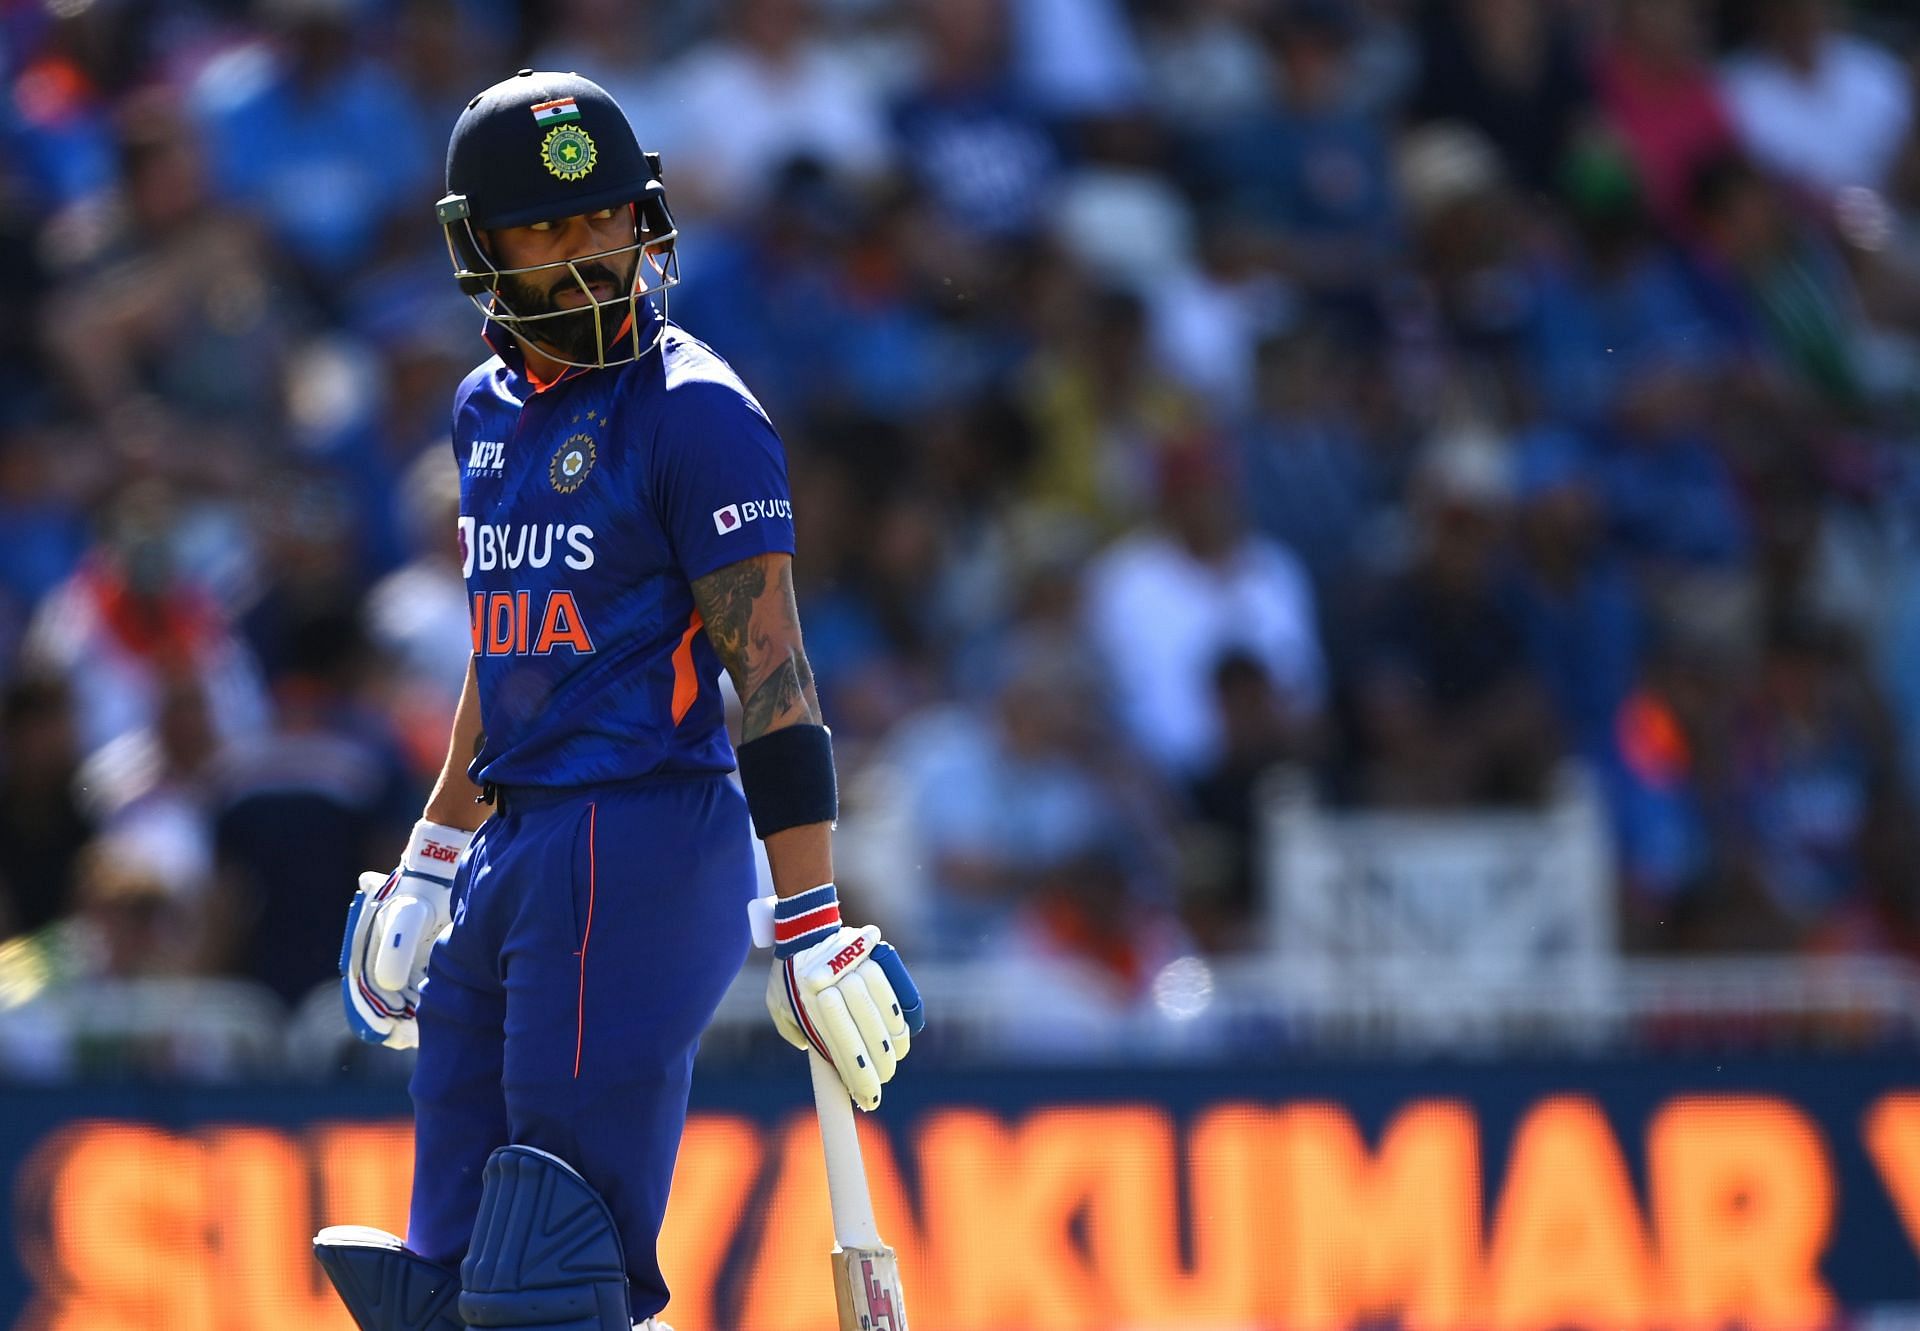 Kohli is a doubt for the first ODI due to a groin strain